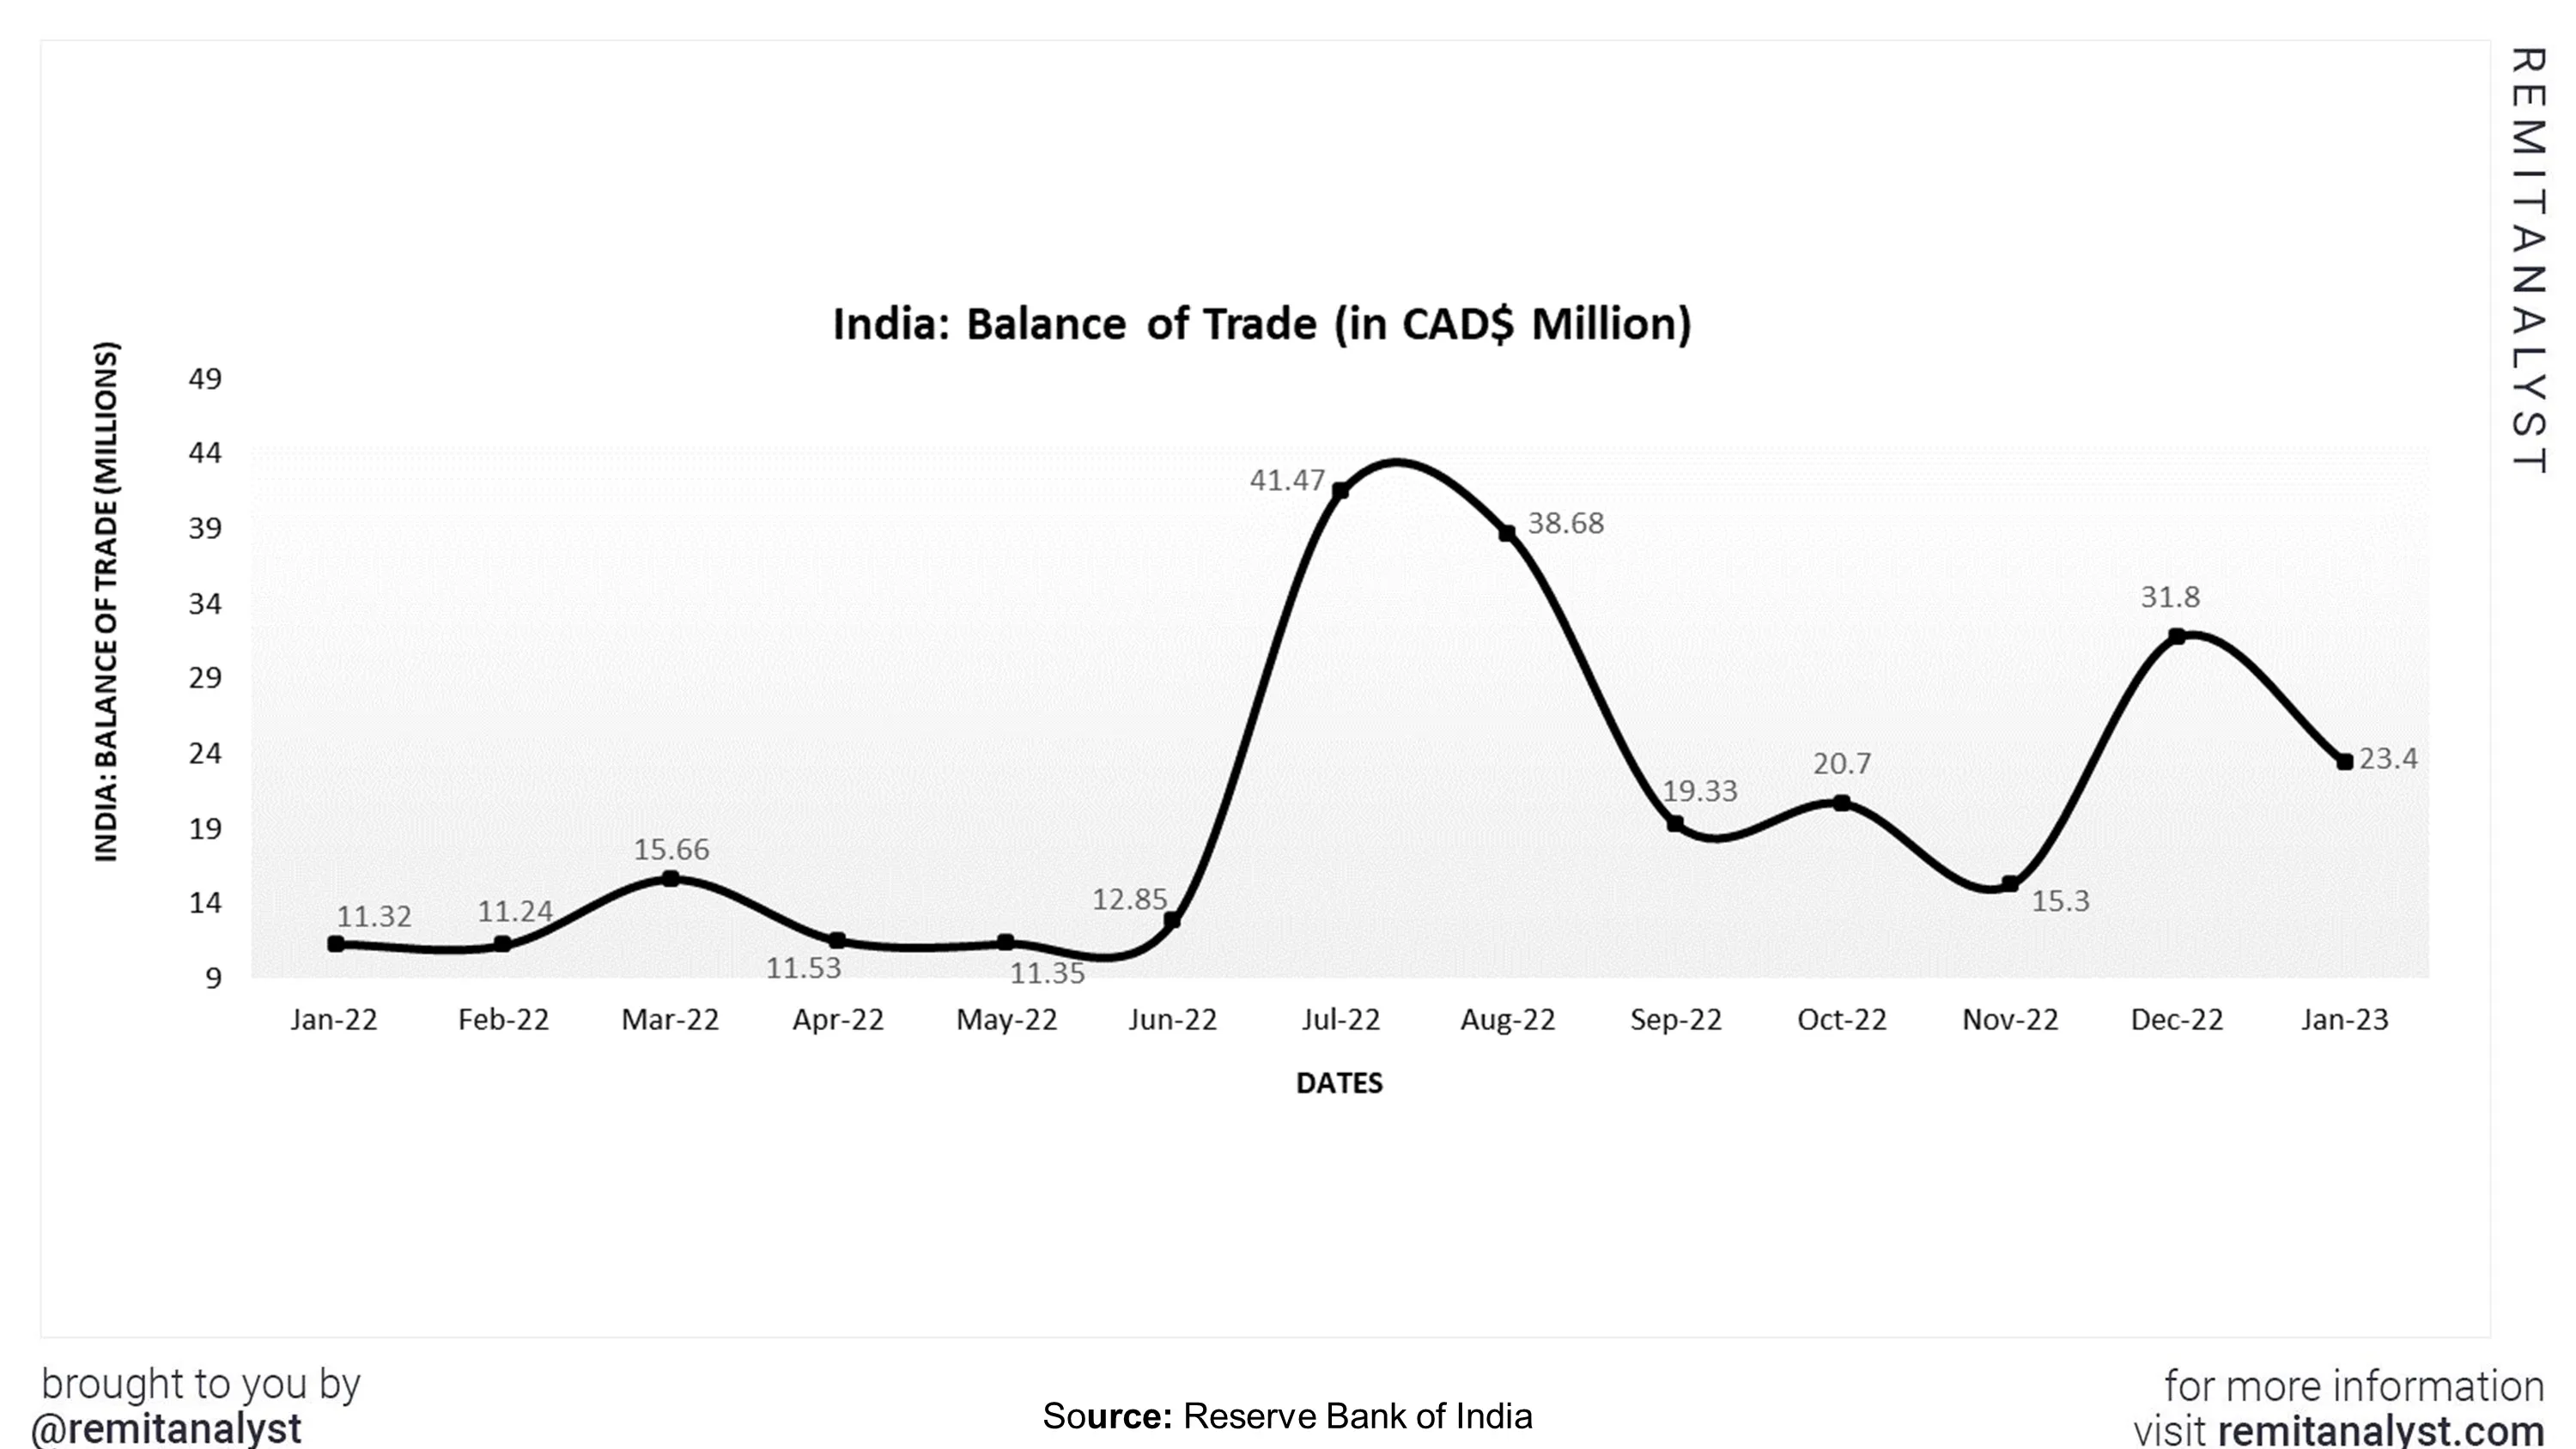 balance-of-trade-india-sep-from-jan-2022-to-jan-2023